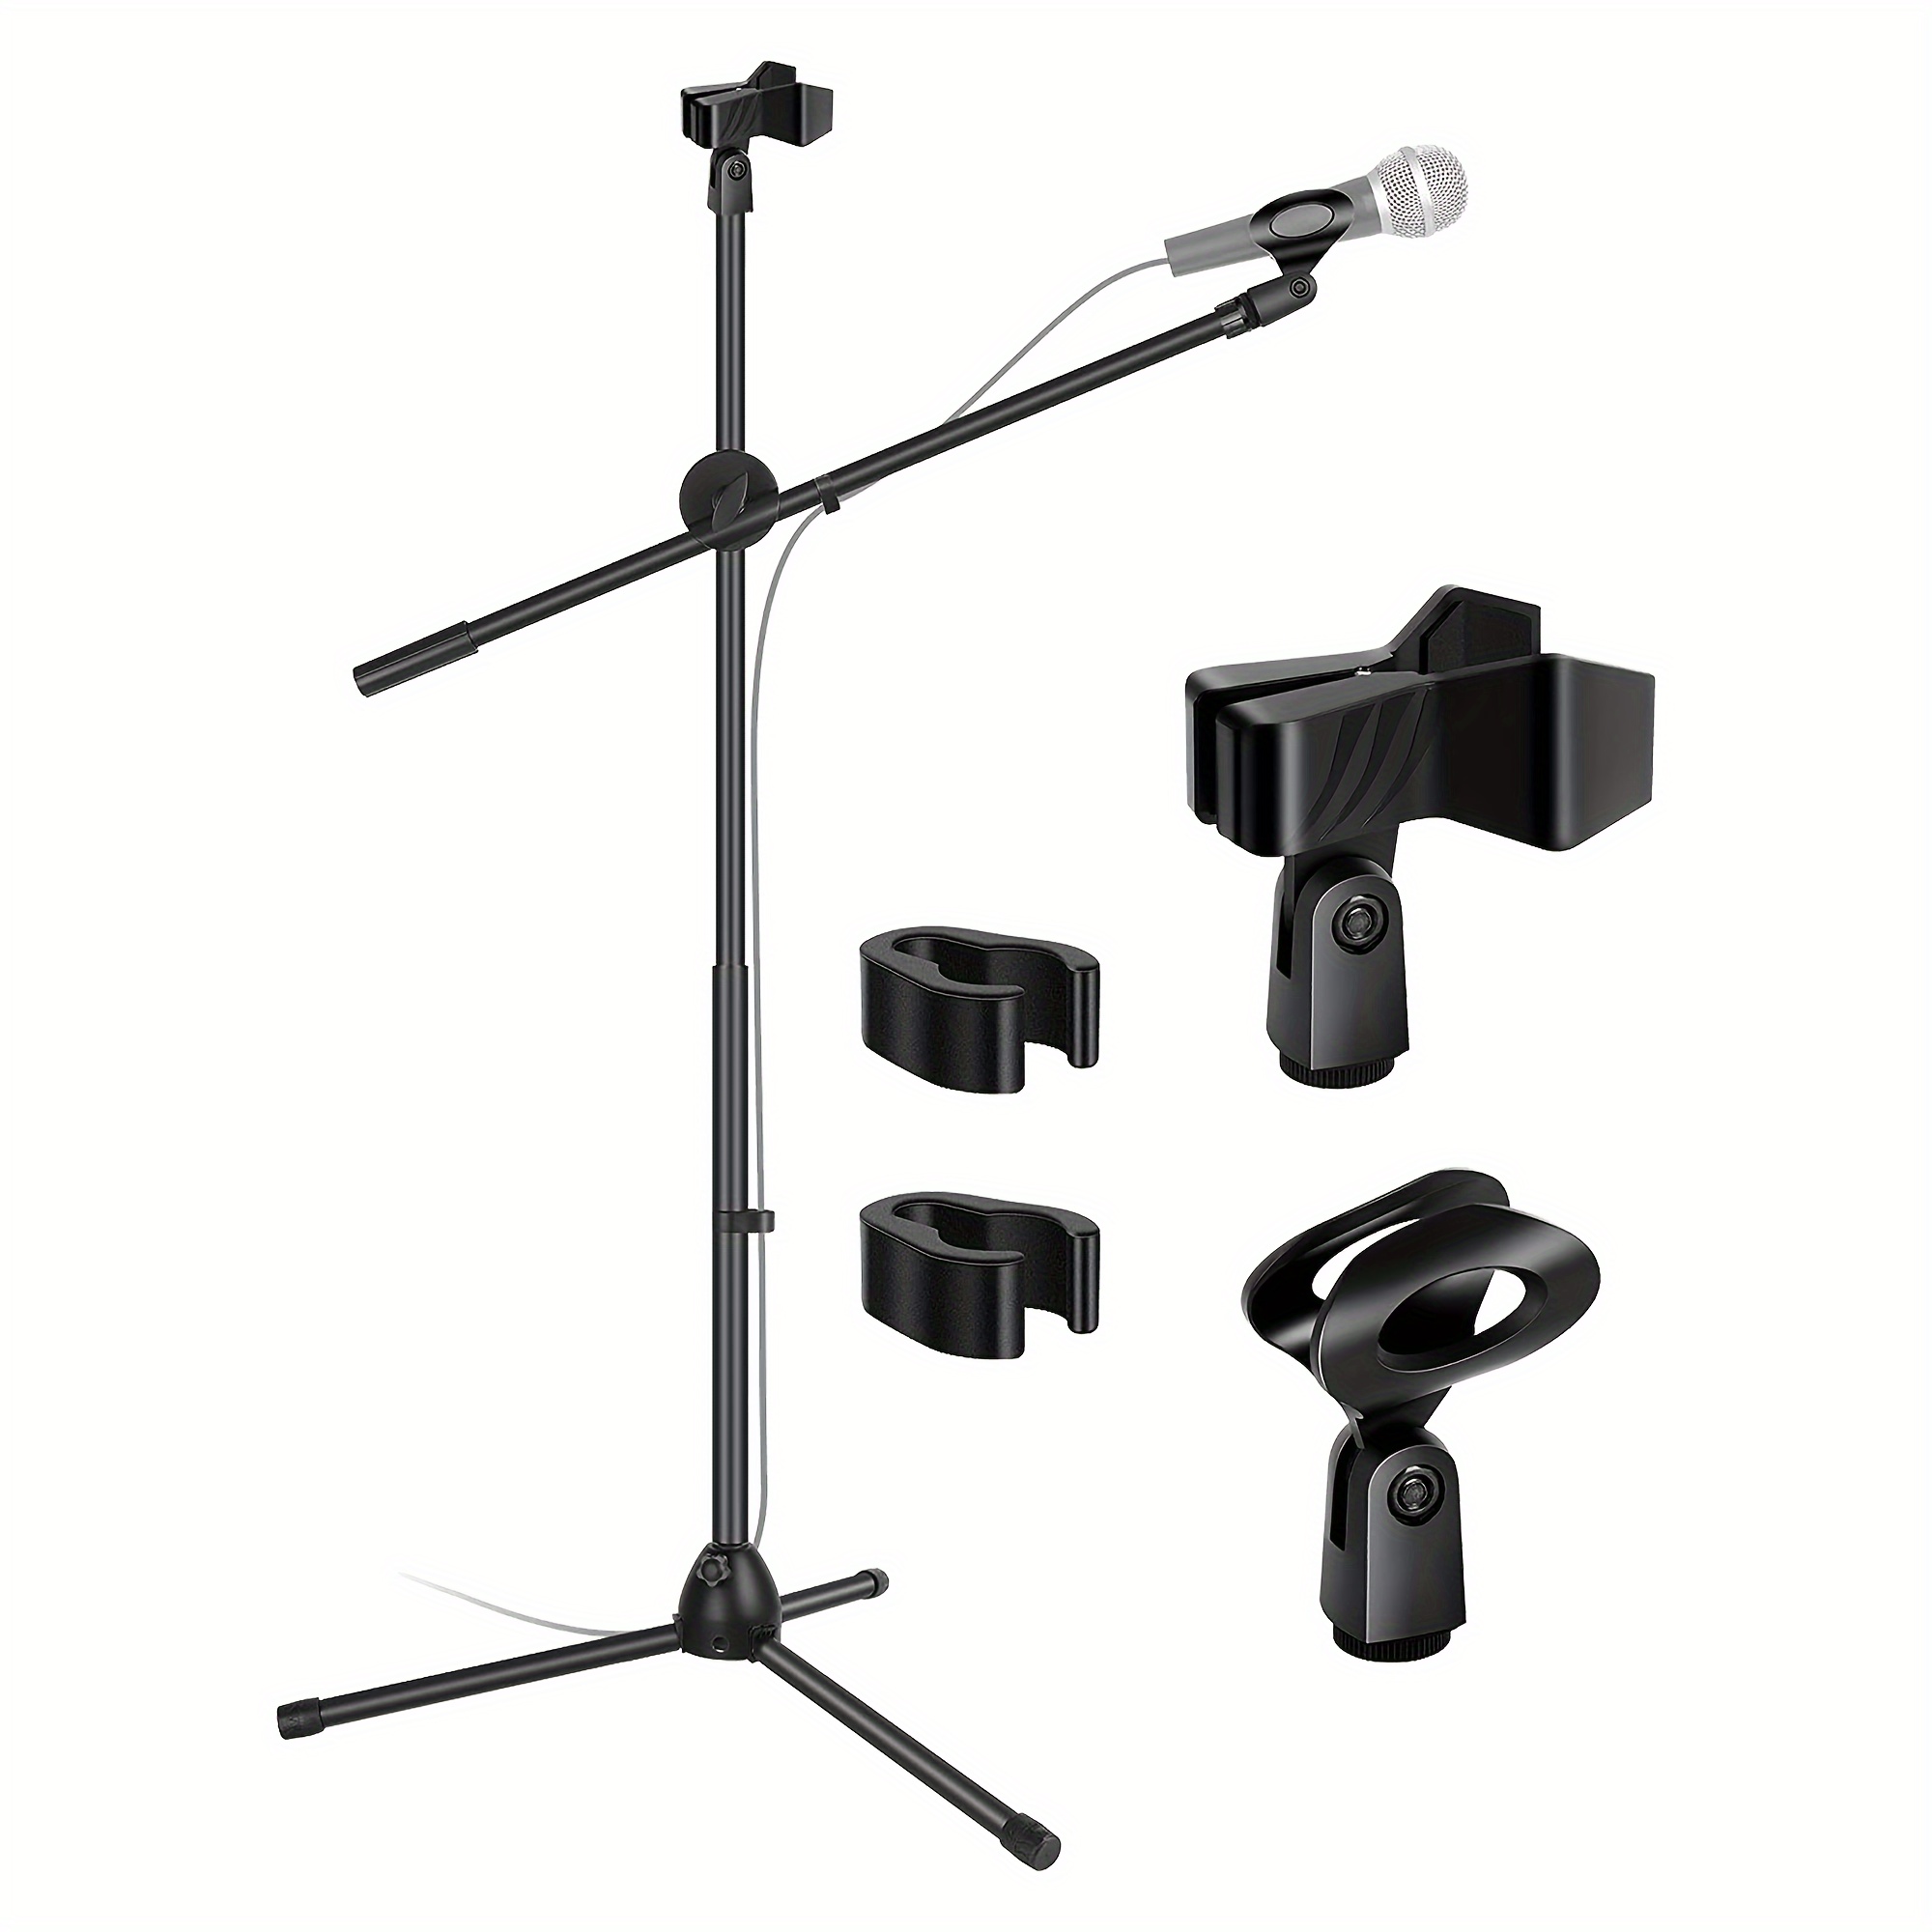 

Microphone Stand Boom With Tripod Base Foldable Adjustable Height Up To 86 Inches 360 Degree Rotation With Dual Microphone Stand And Gold Microphone Screws Singing Speech Stage Outdoor